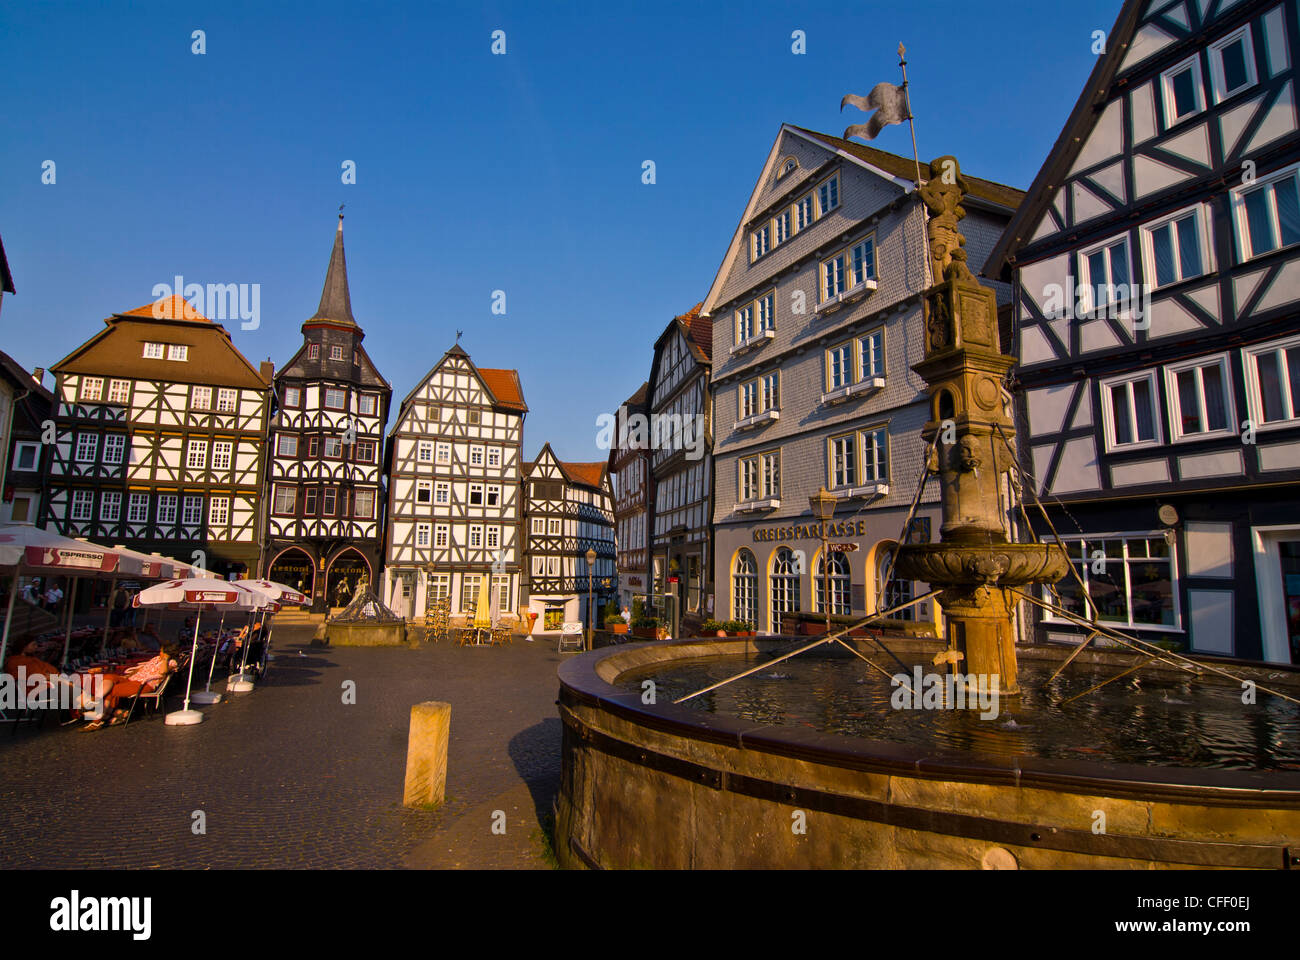 The town square with its half-timbered houses in Fritzlar, Hesse, Germany, Europe Stock Photo